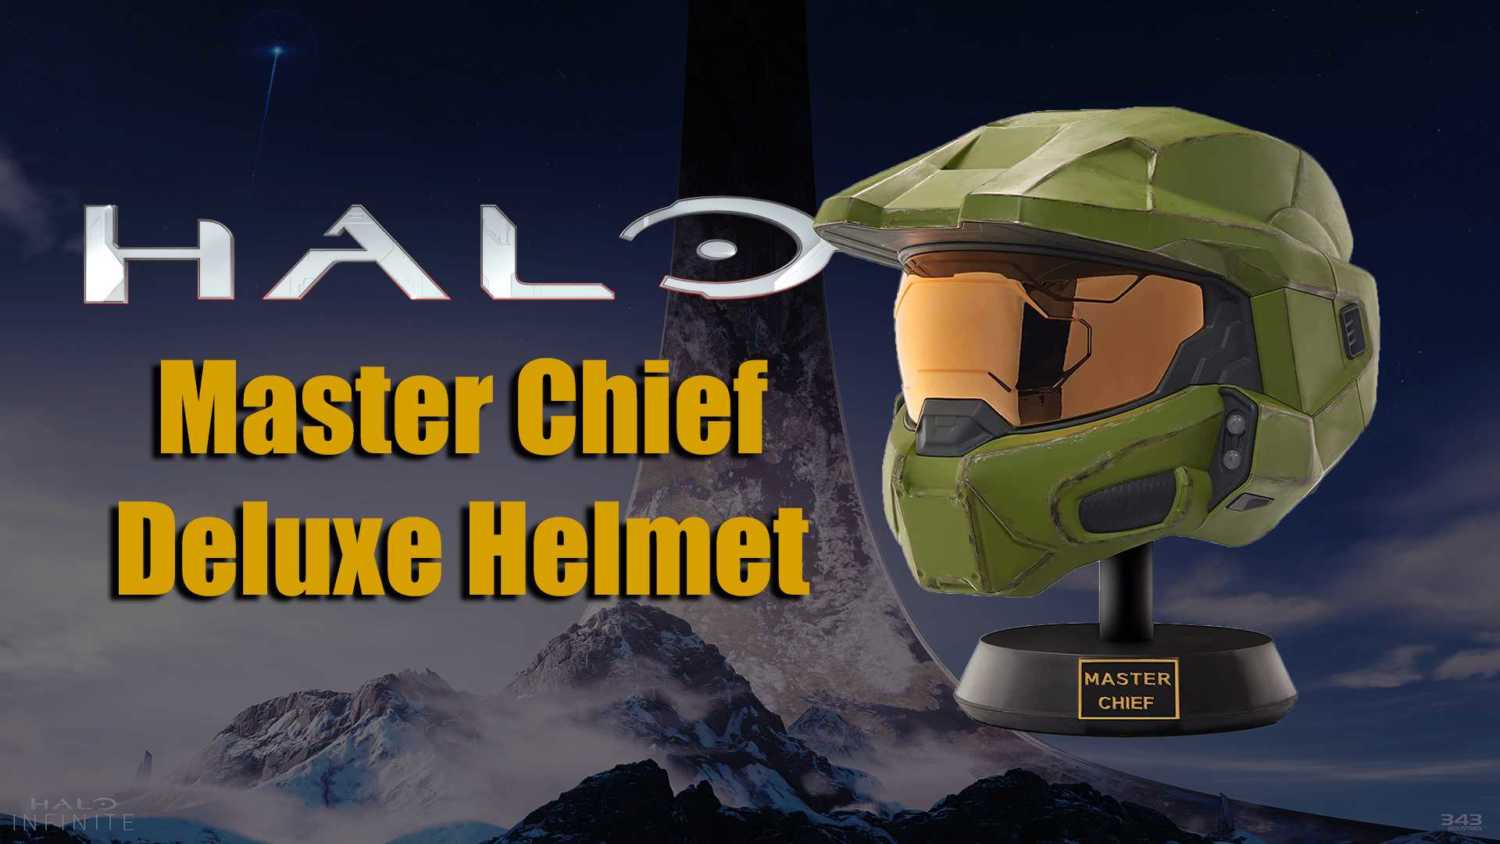 Halo Master Chief Deluxe Helmet Review Image